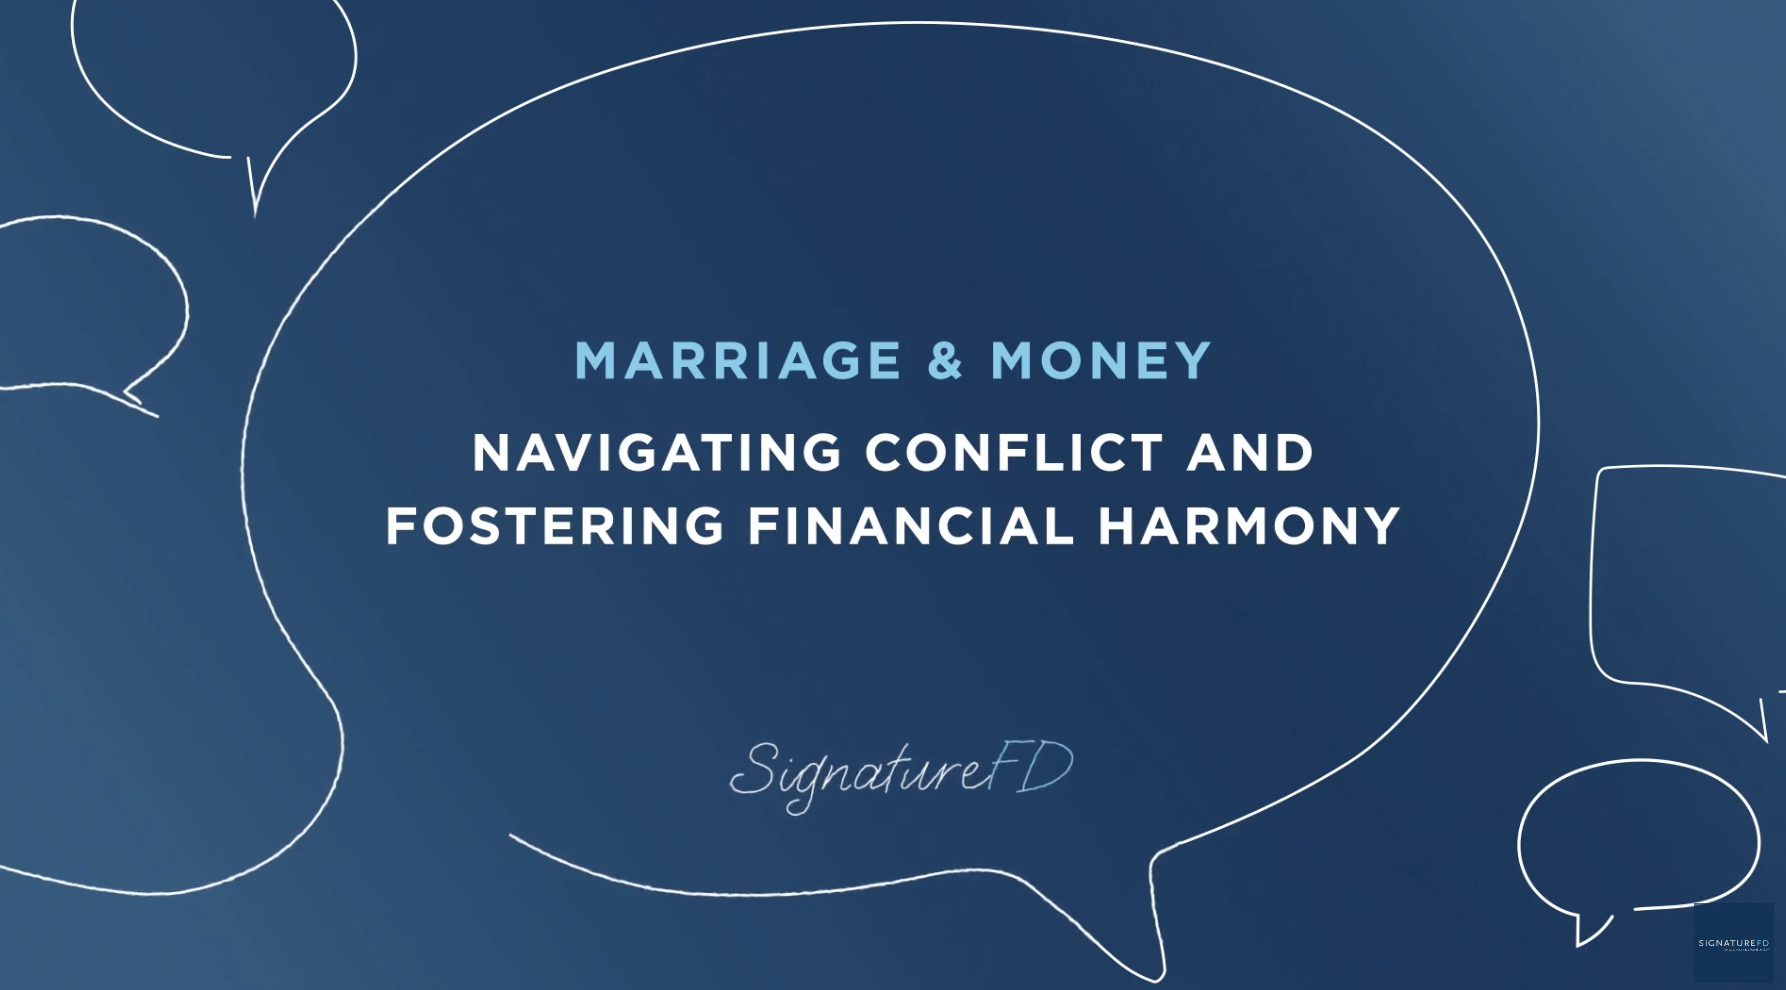 Marriage & Money: Navigating Conflict and Fostering Financial Harmony by SignatureFD